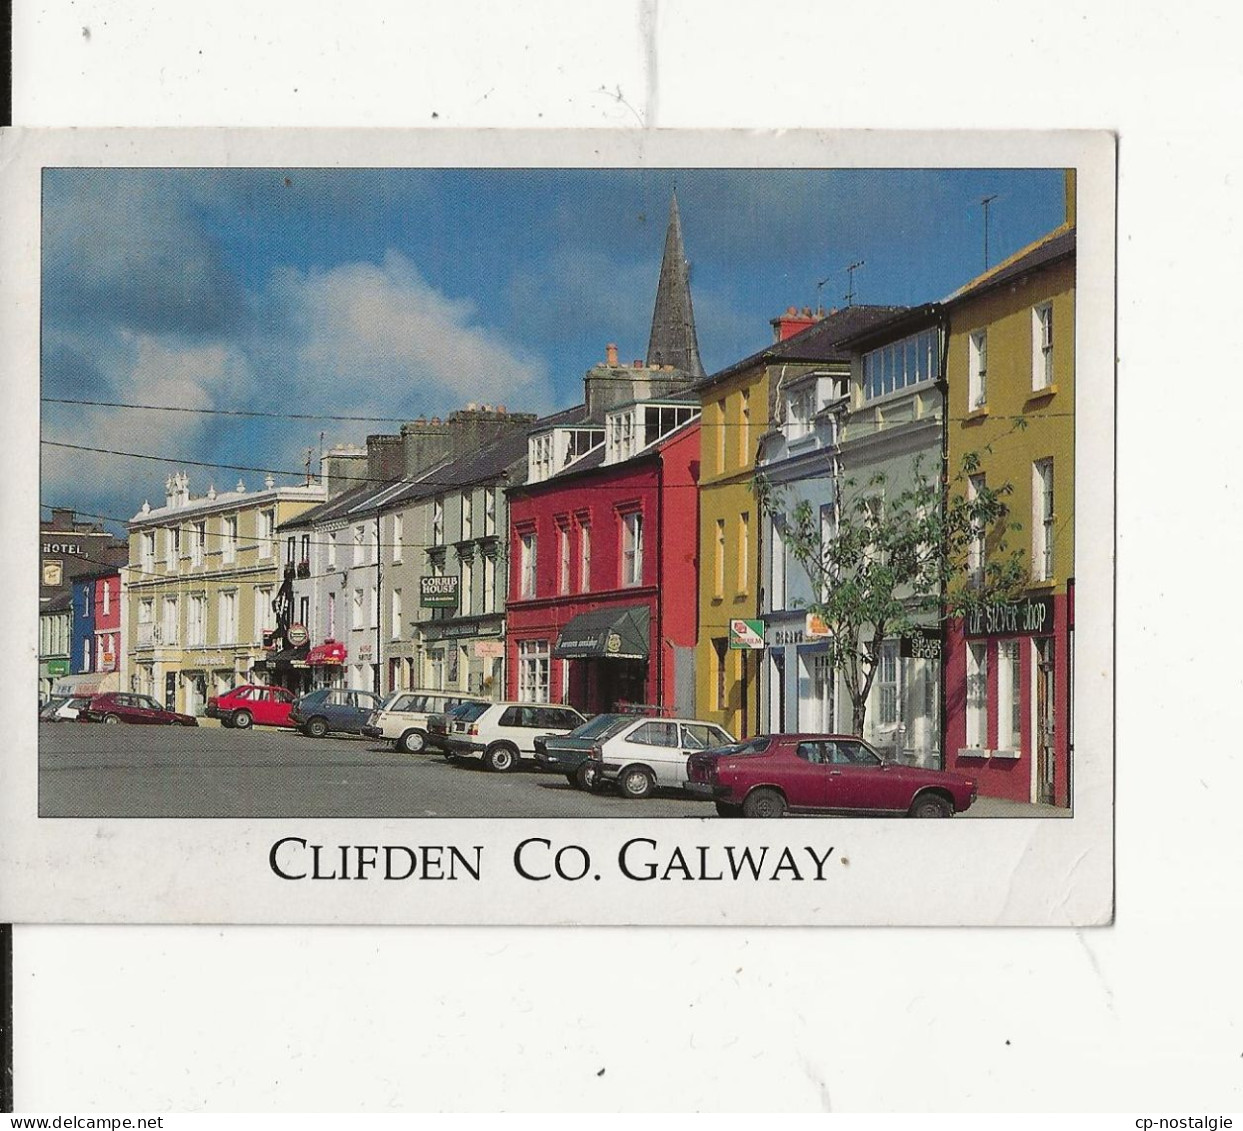 CLIFDEN CO. GALWAY - Galway